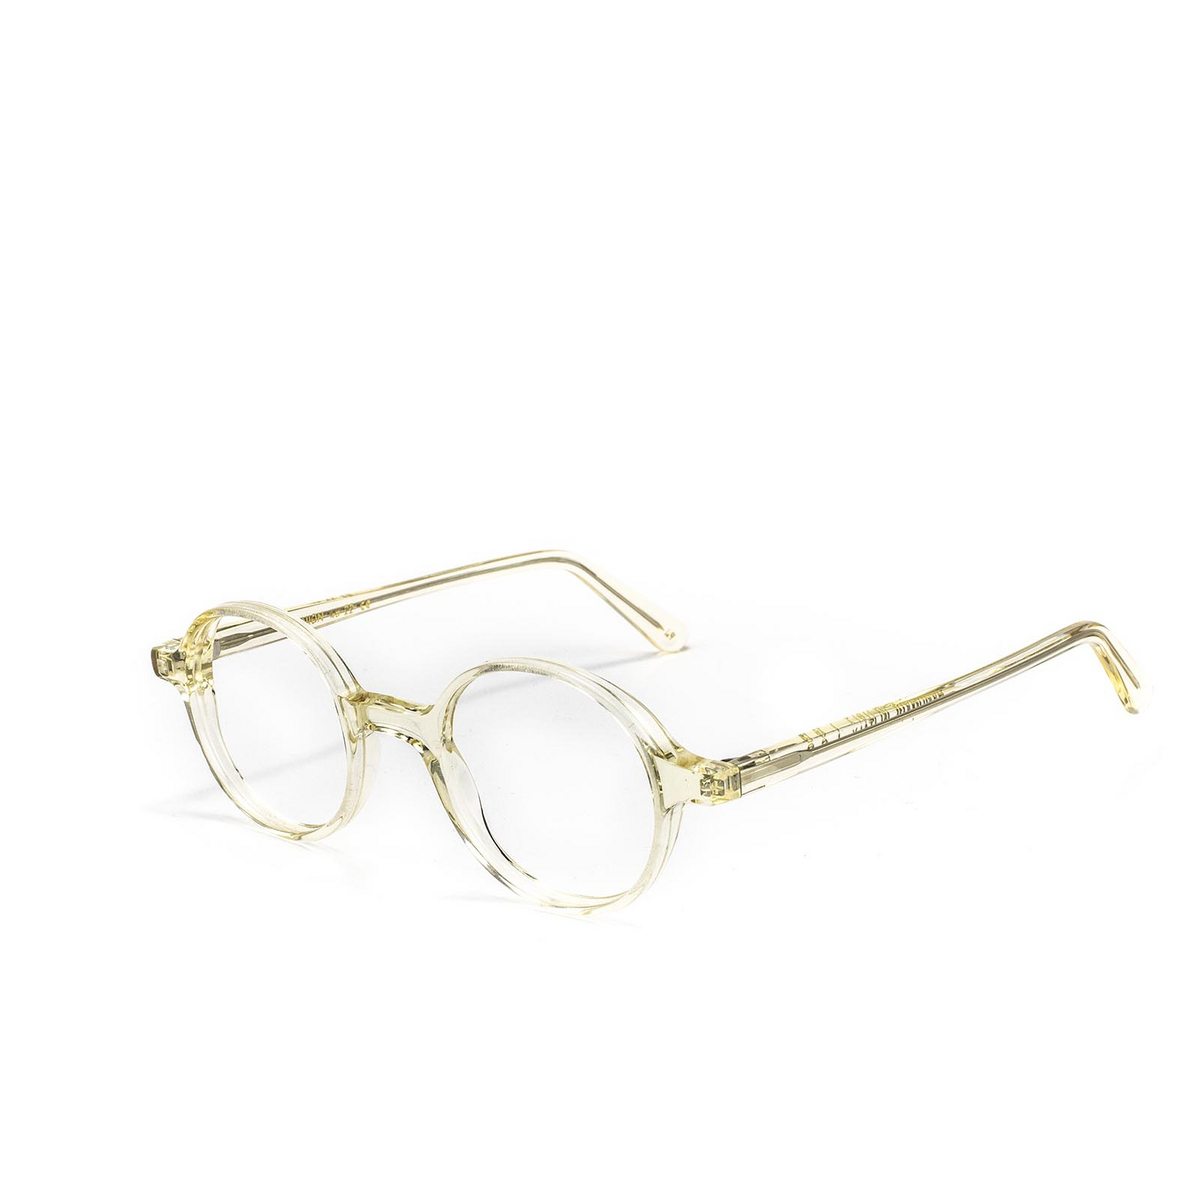 L.G.R® Round Eyeglasses: Reunion Opt color Champagne 49 - three-quarters view.